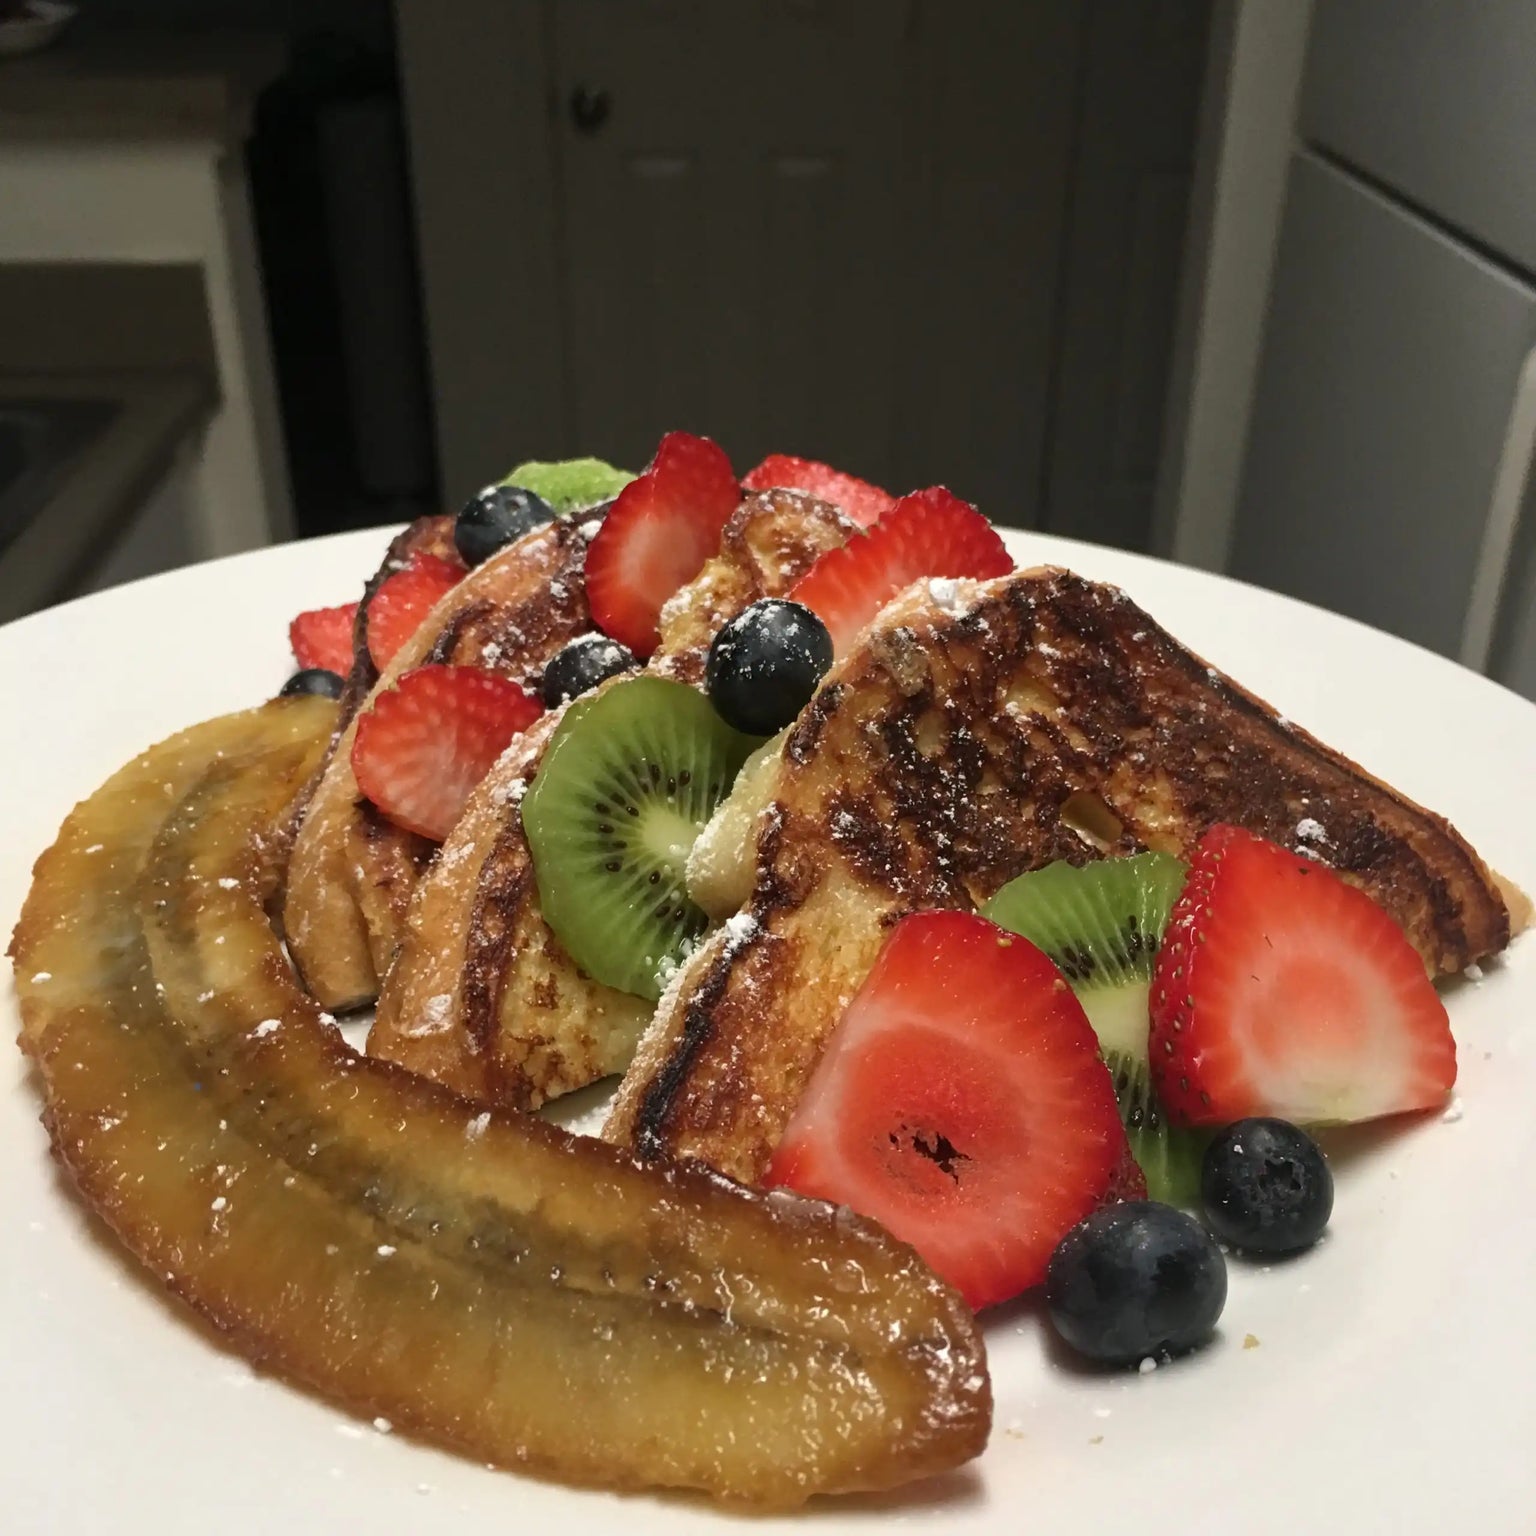 Agege Bread French Toast and Fruits - Adun